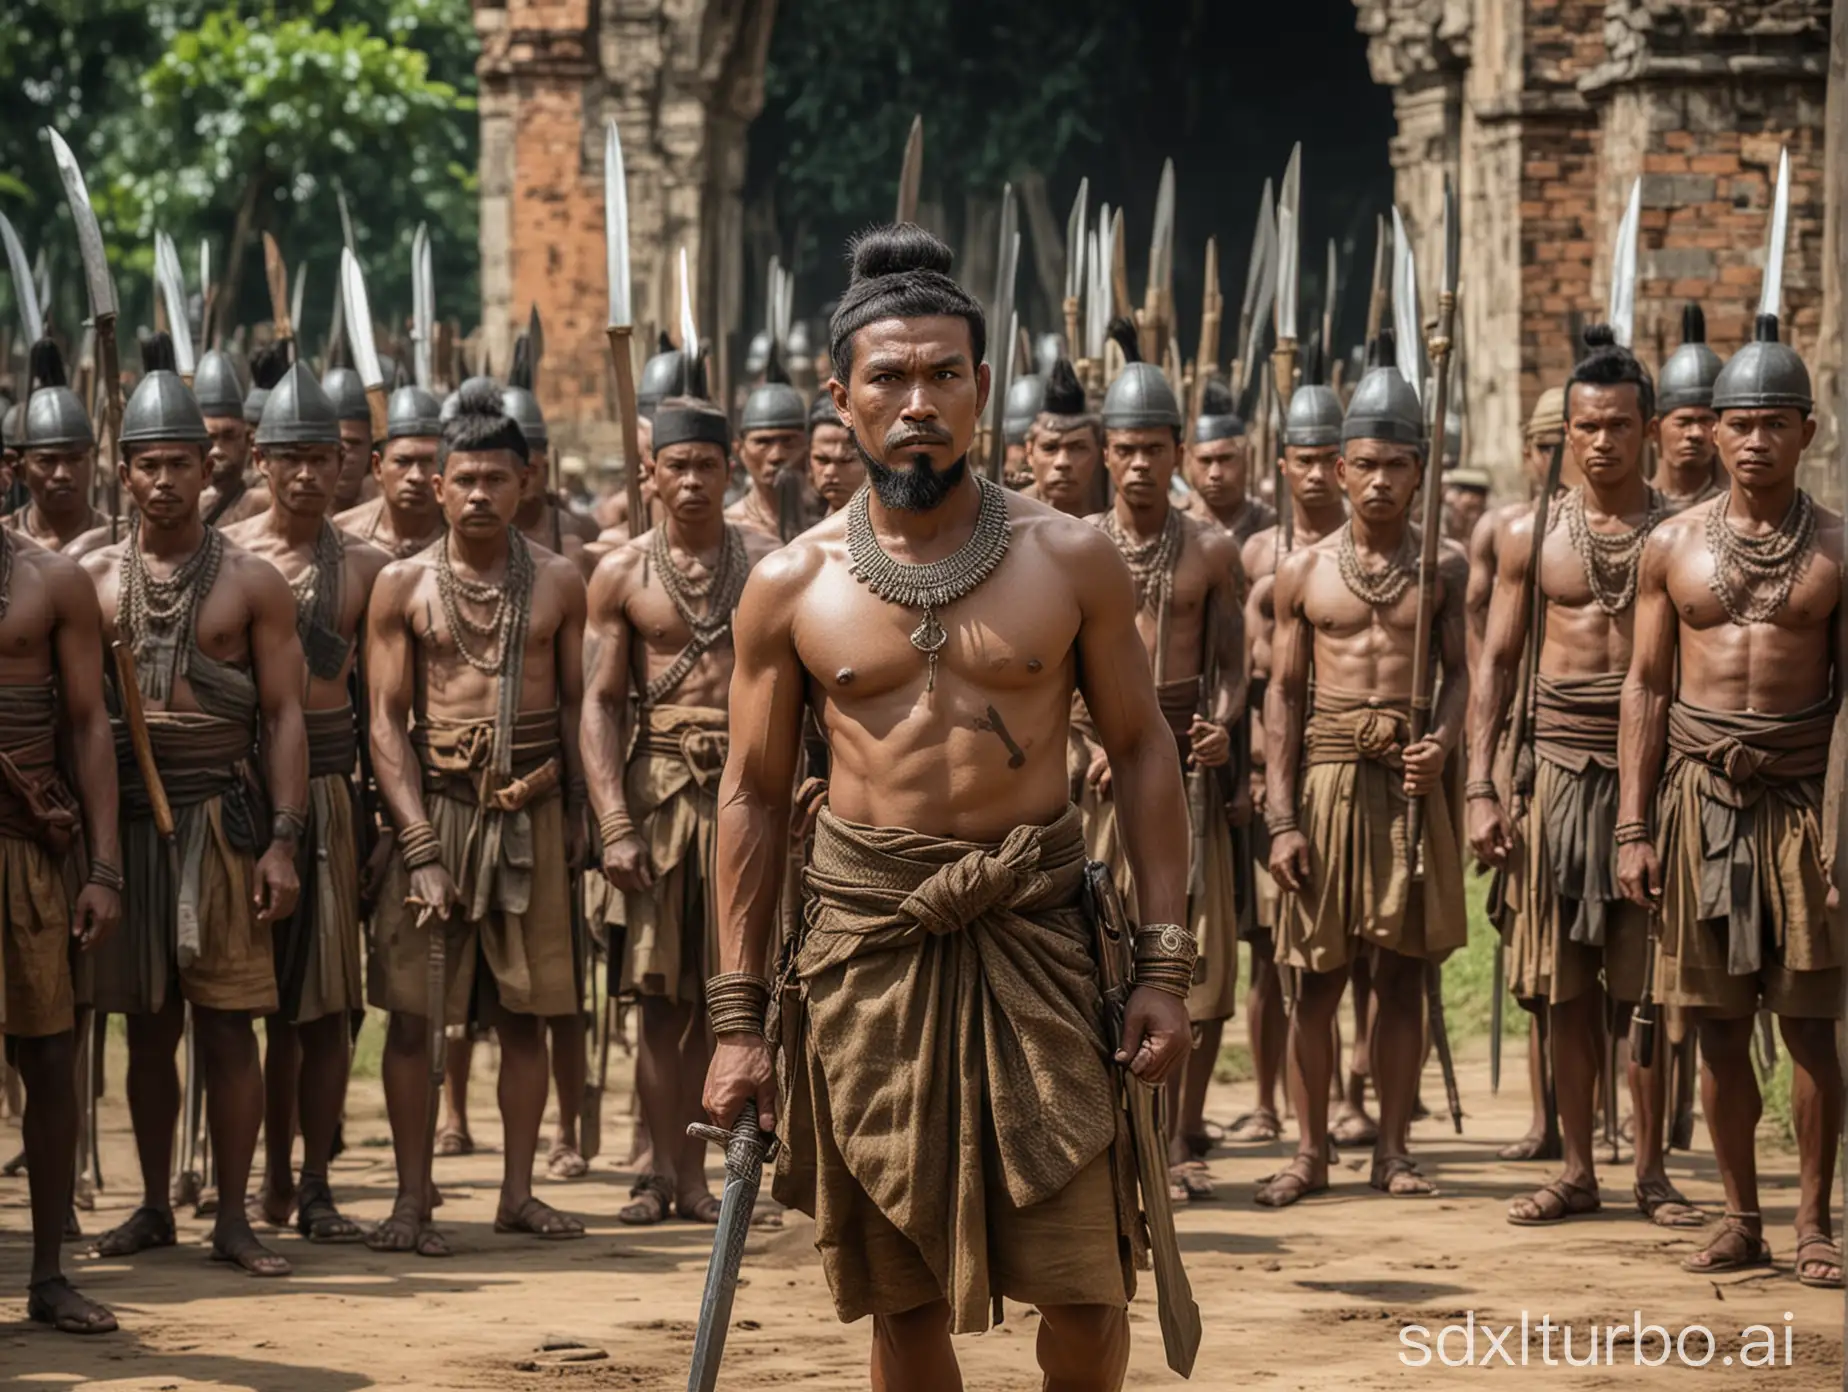 many soldier with a large athletic body like an ancient Javanese king, was seen standing in front of the ancient kingdom of Majapahit carrying a large sword. 